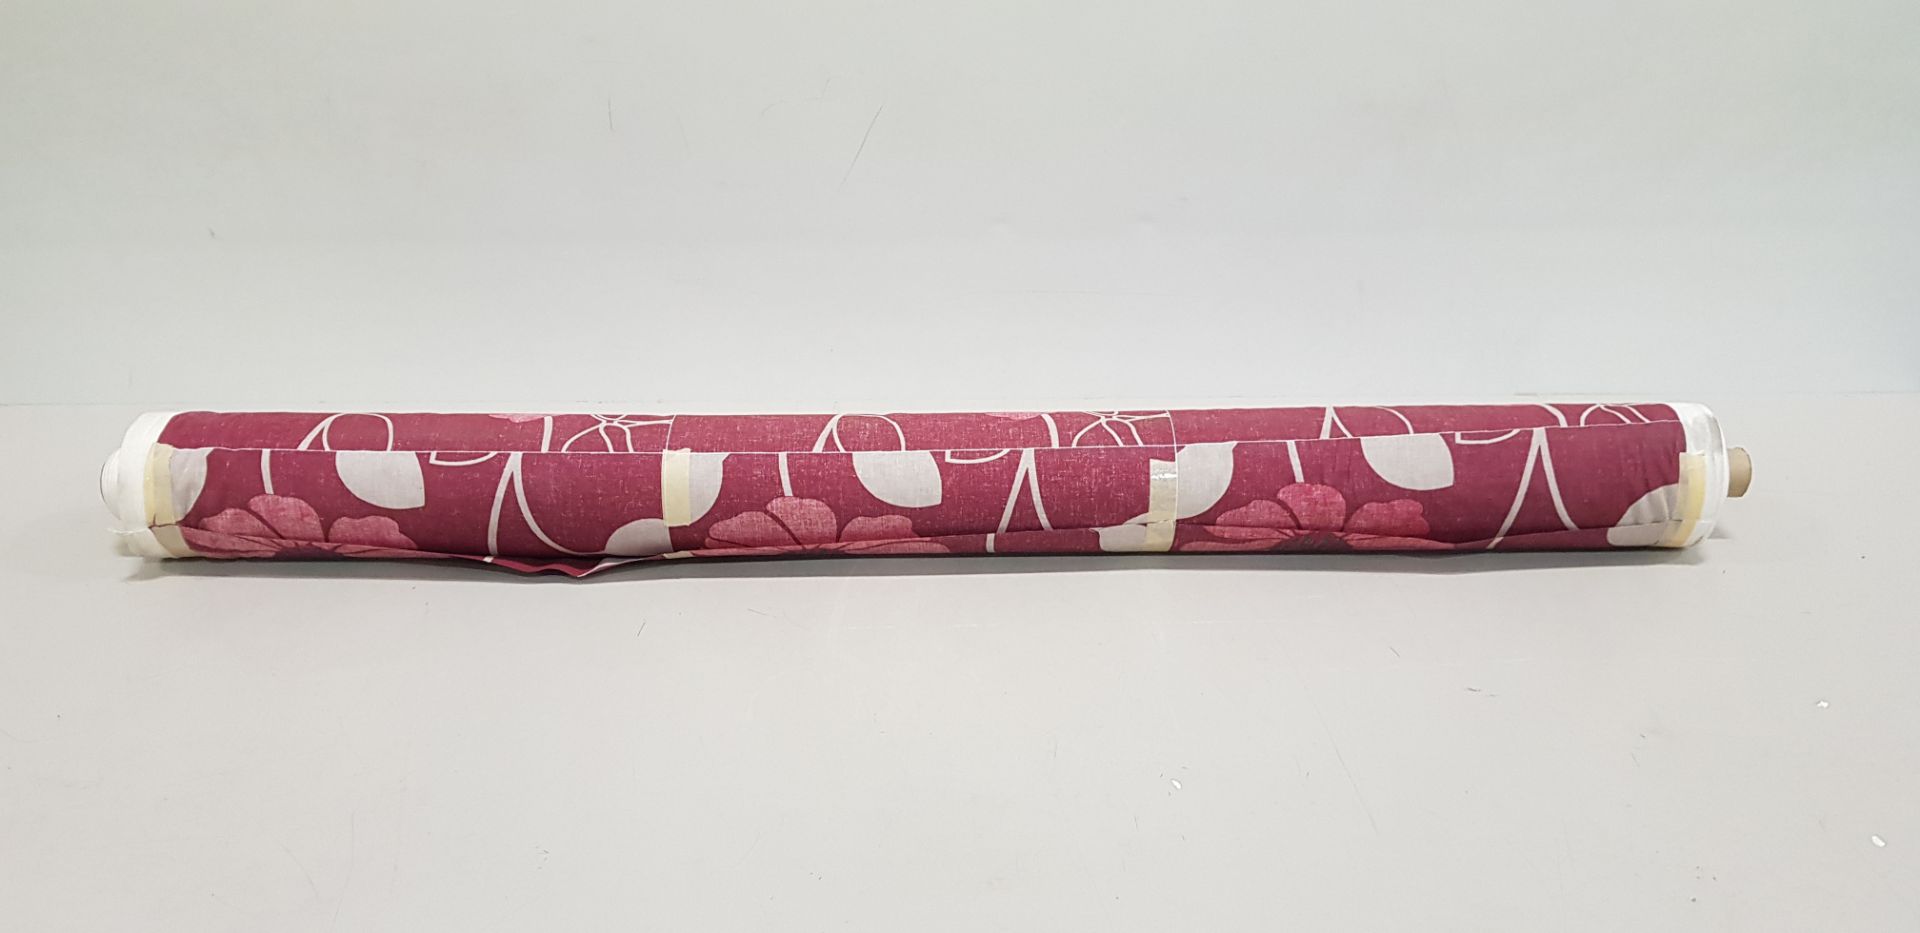 1 X ROLL OF FABRIC IN RED / WHITE FLORAL DESIGN -LENGTH 30M - £12.99 / M - TOTAL £389.7